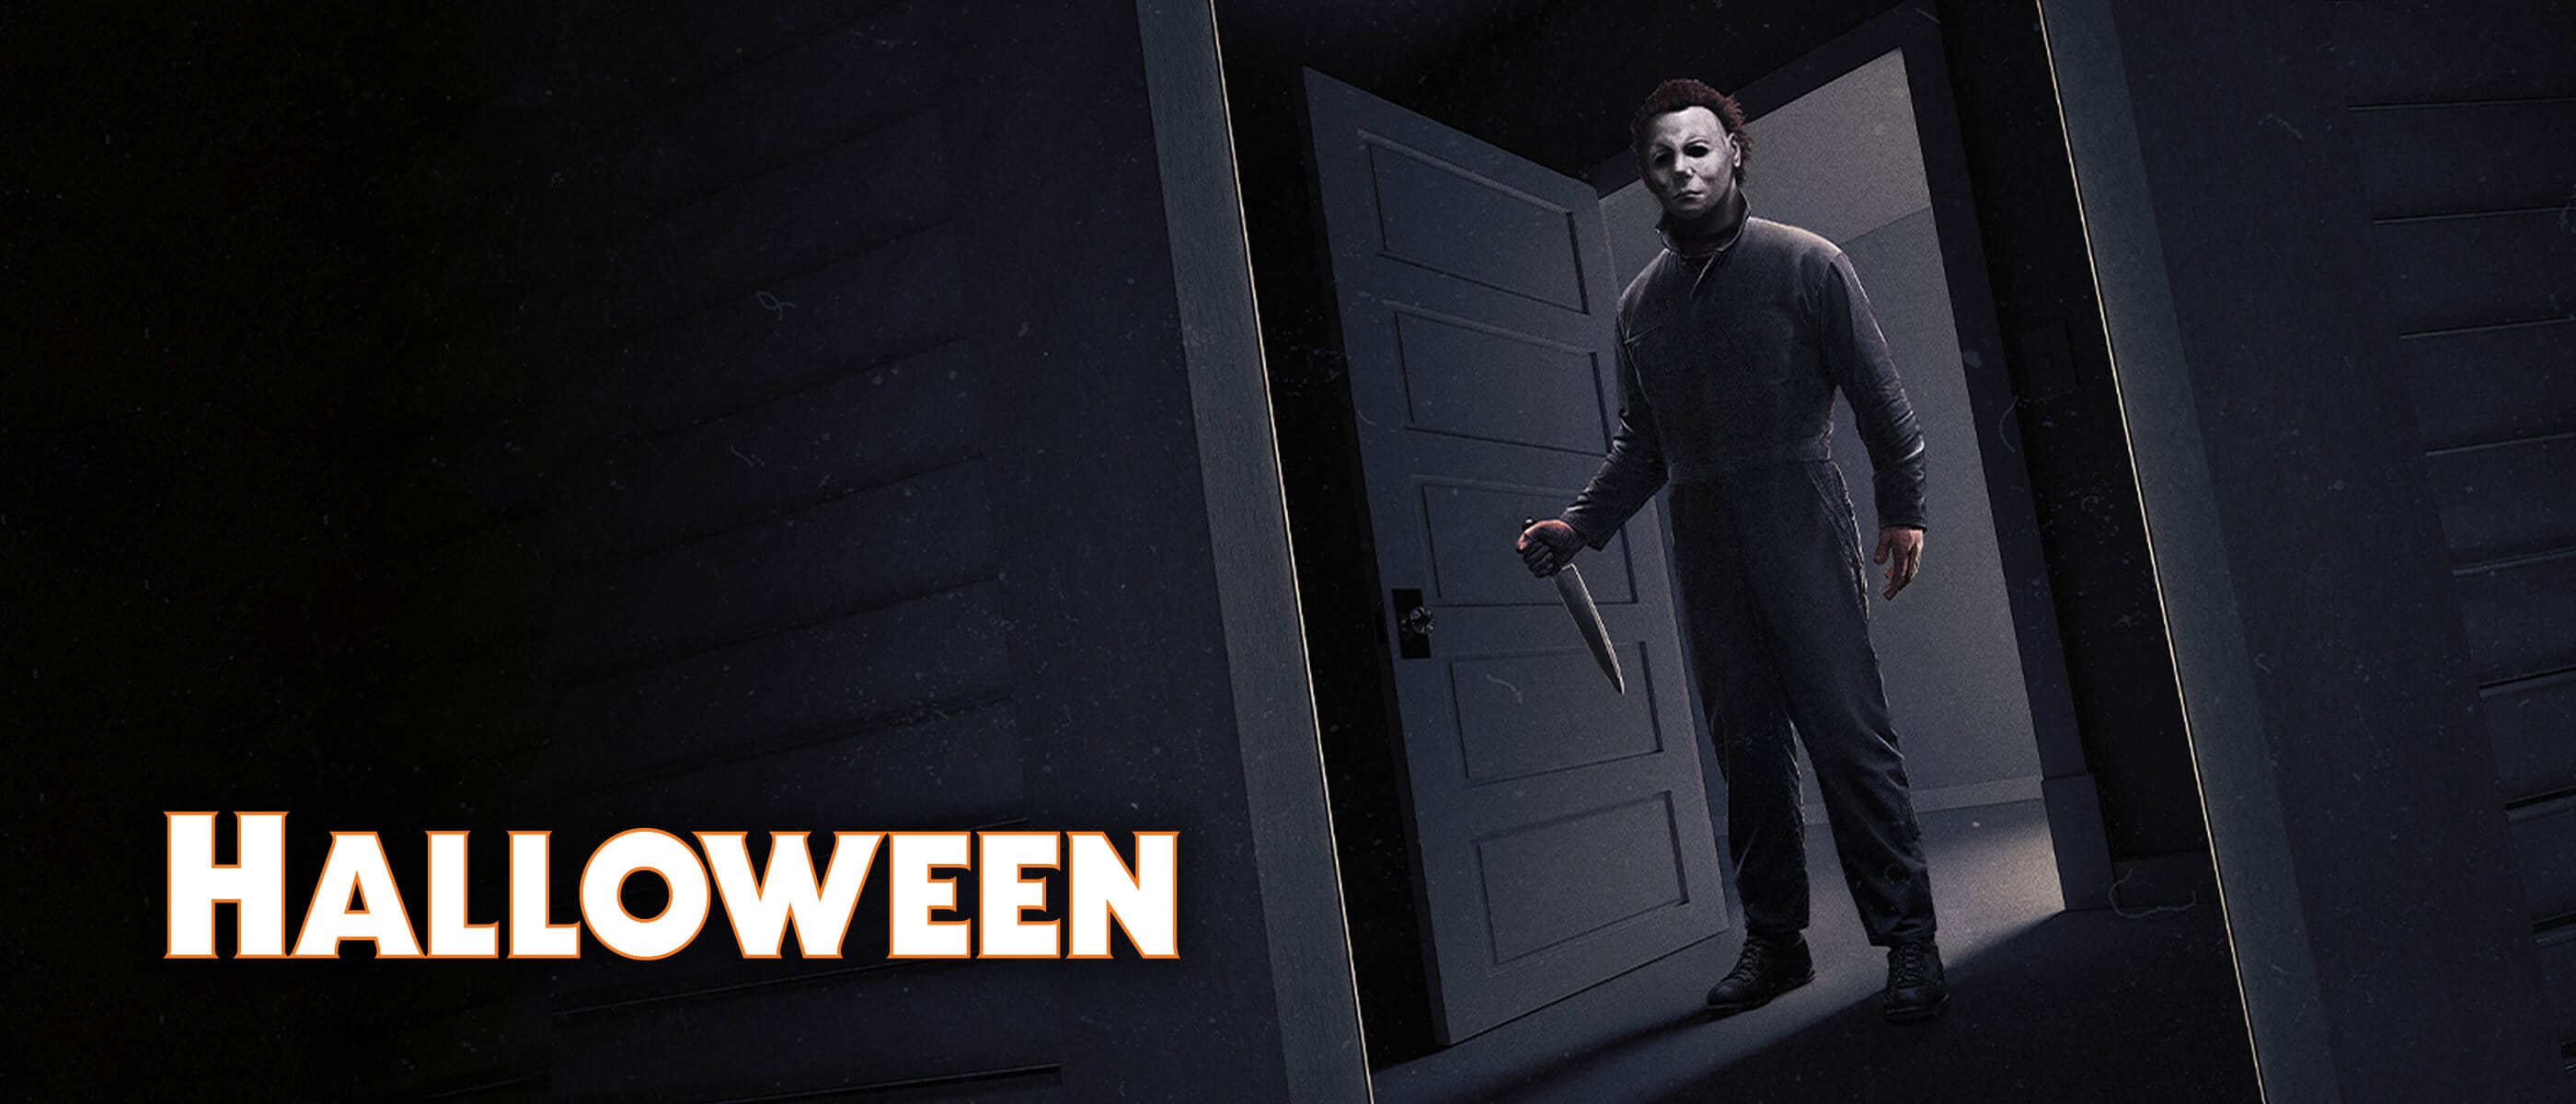 Halloween: The evil, masked Michael Myers character wields a knife in a doorway.